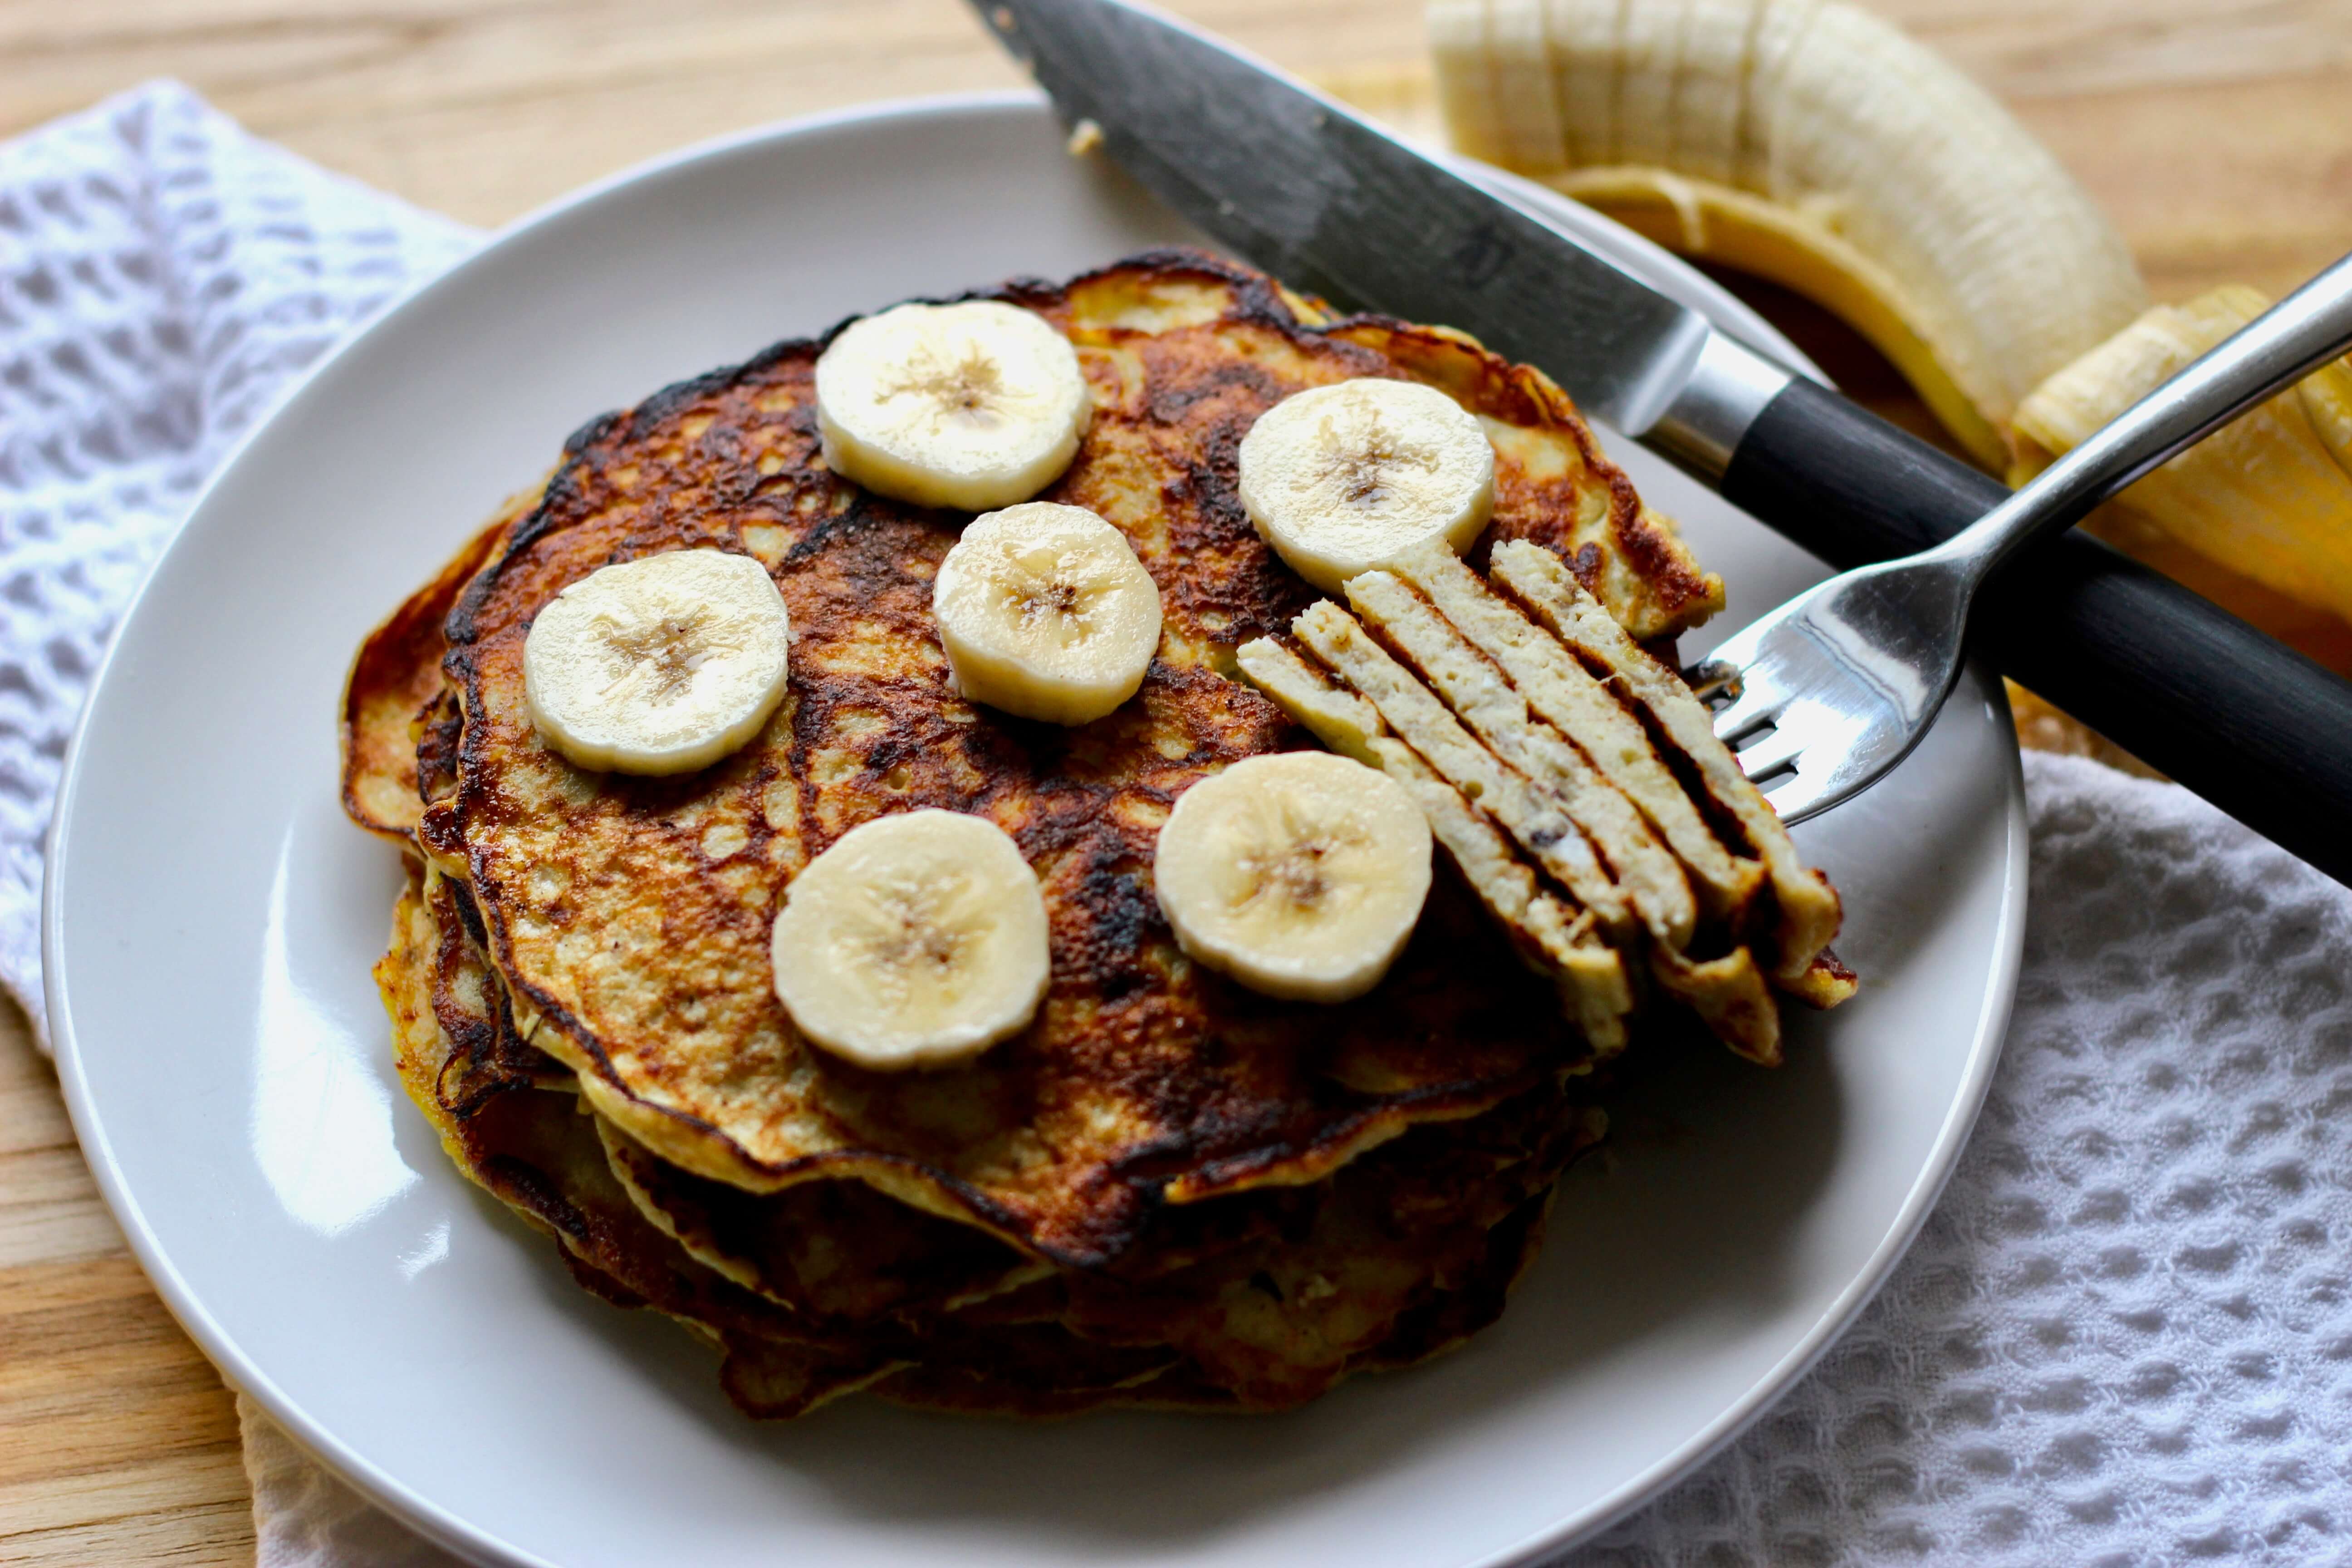 20 Specific Carbohydrate Diet Meals to Help Clients With Inflammatory Bowel Disease: Simple Banana Pancakes